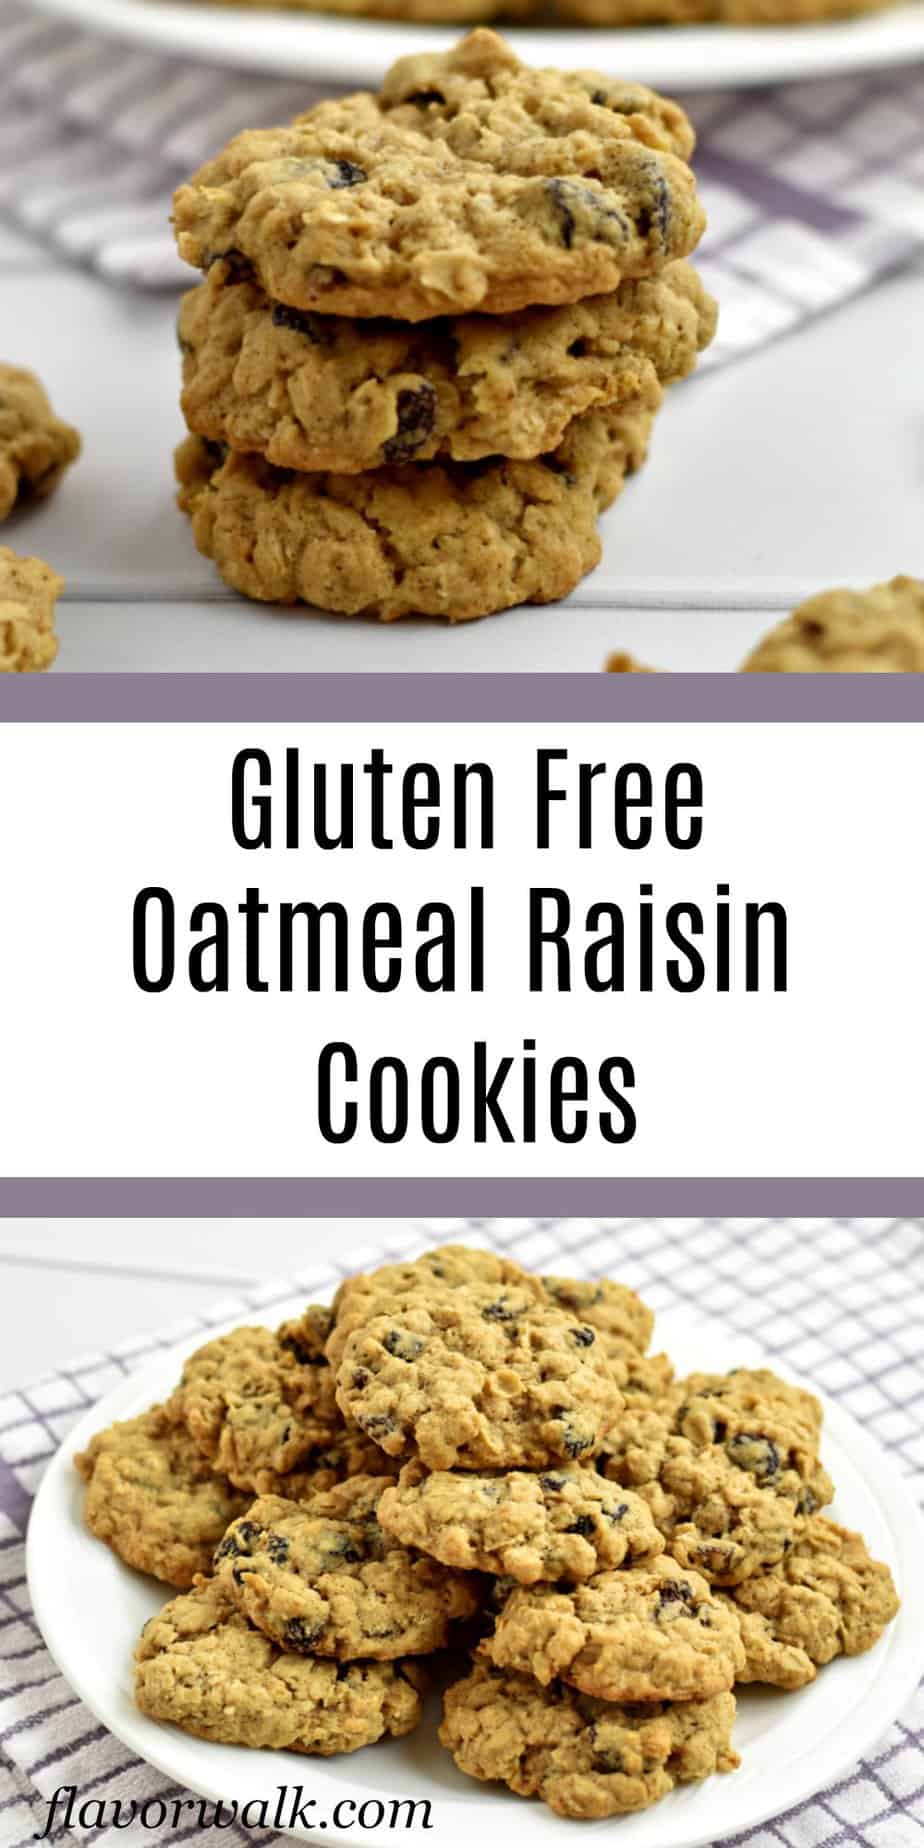 These Gluten Free Oatmeal Raisin Cookies are filled with raisins and lots of oats. They’re soft, chewy, and impossible to resist!